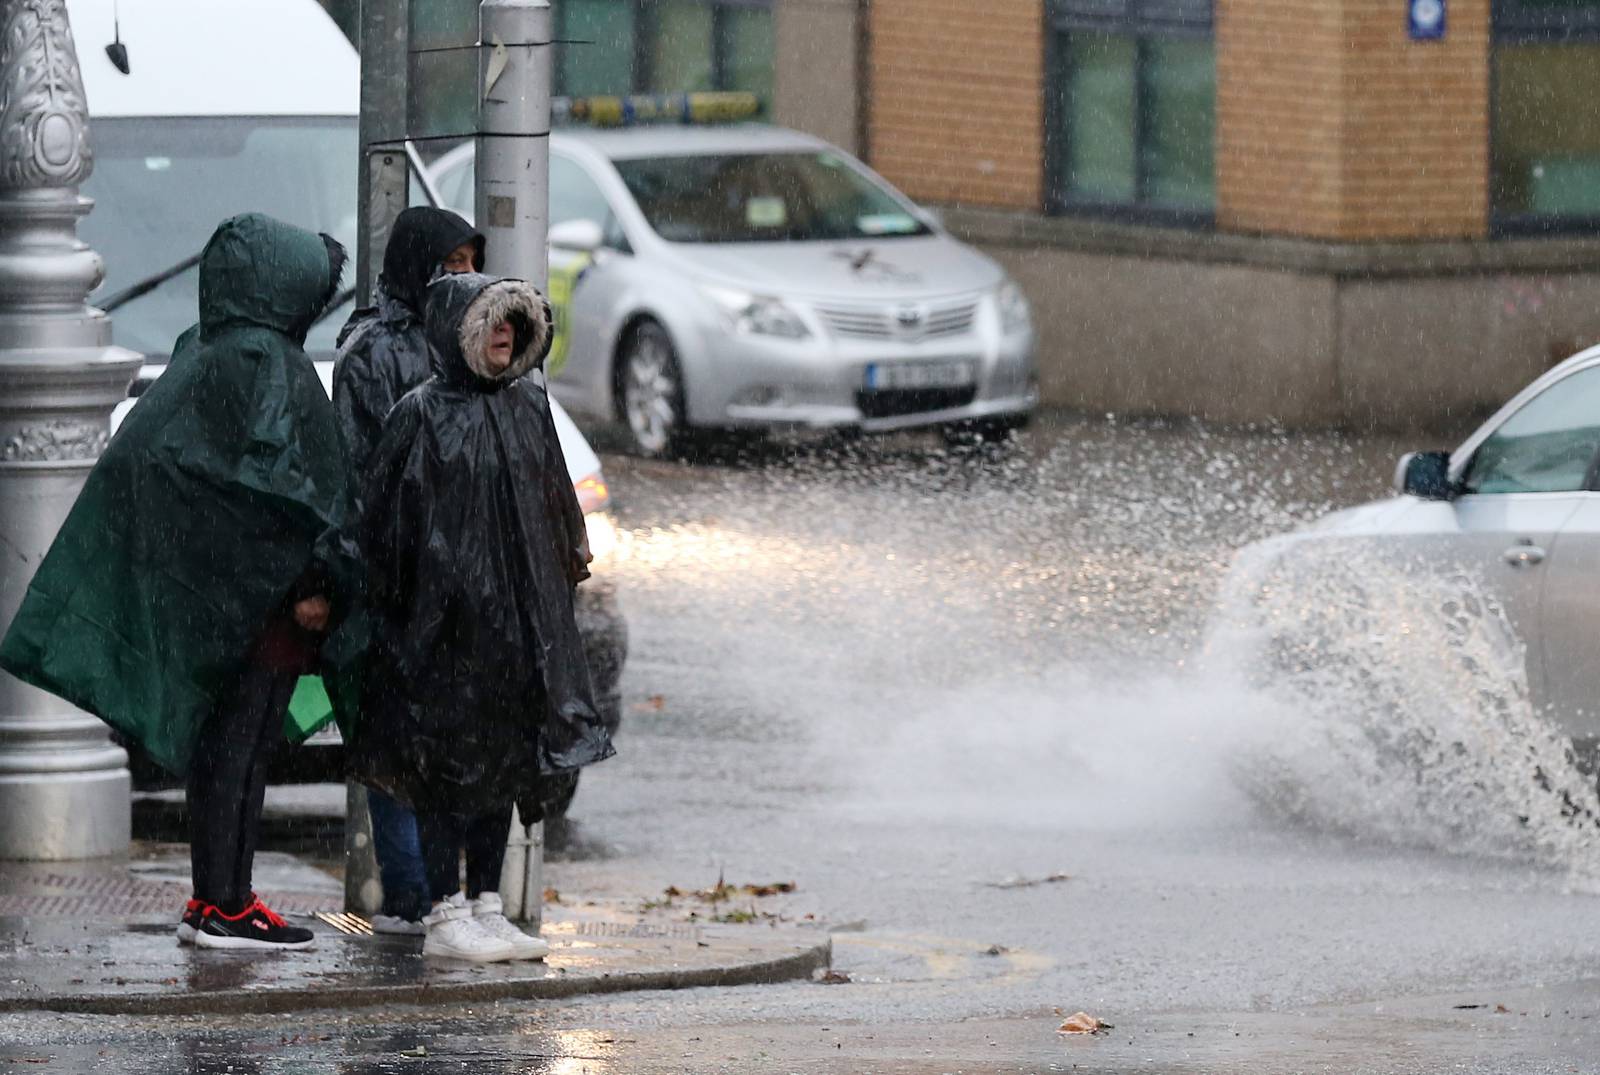 27/11/2018. People wait at a pedestrain crossing during a downpour in Dublin. Photo: Laura Hutton/Collins Photo Agency